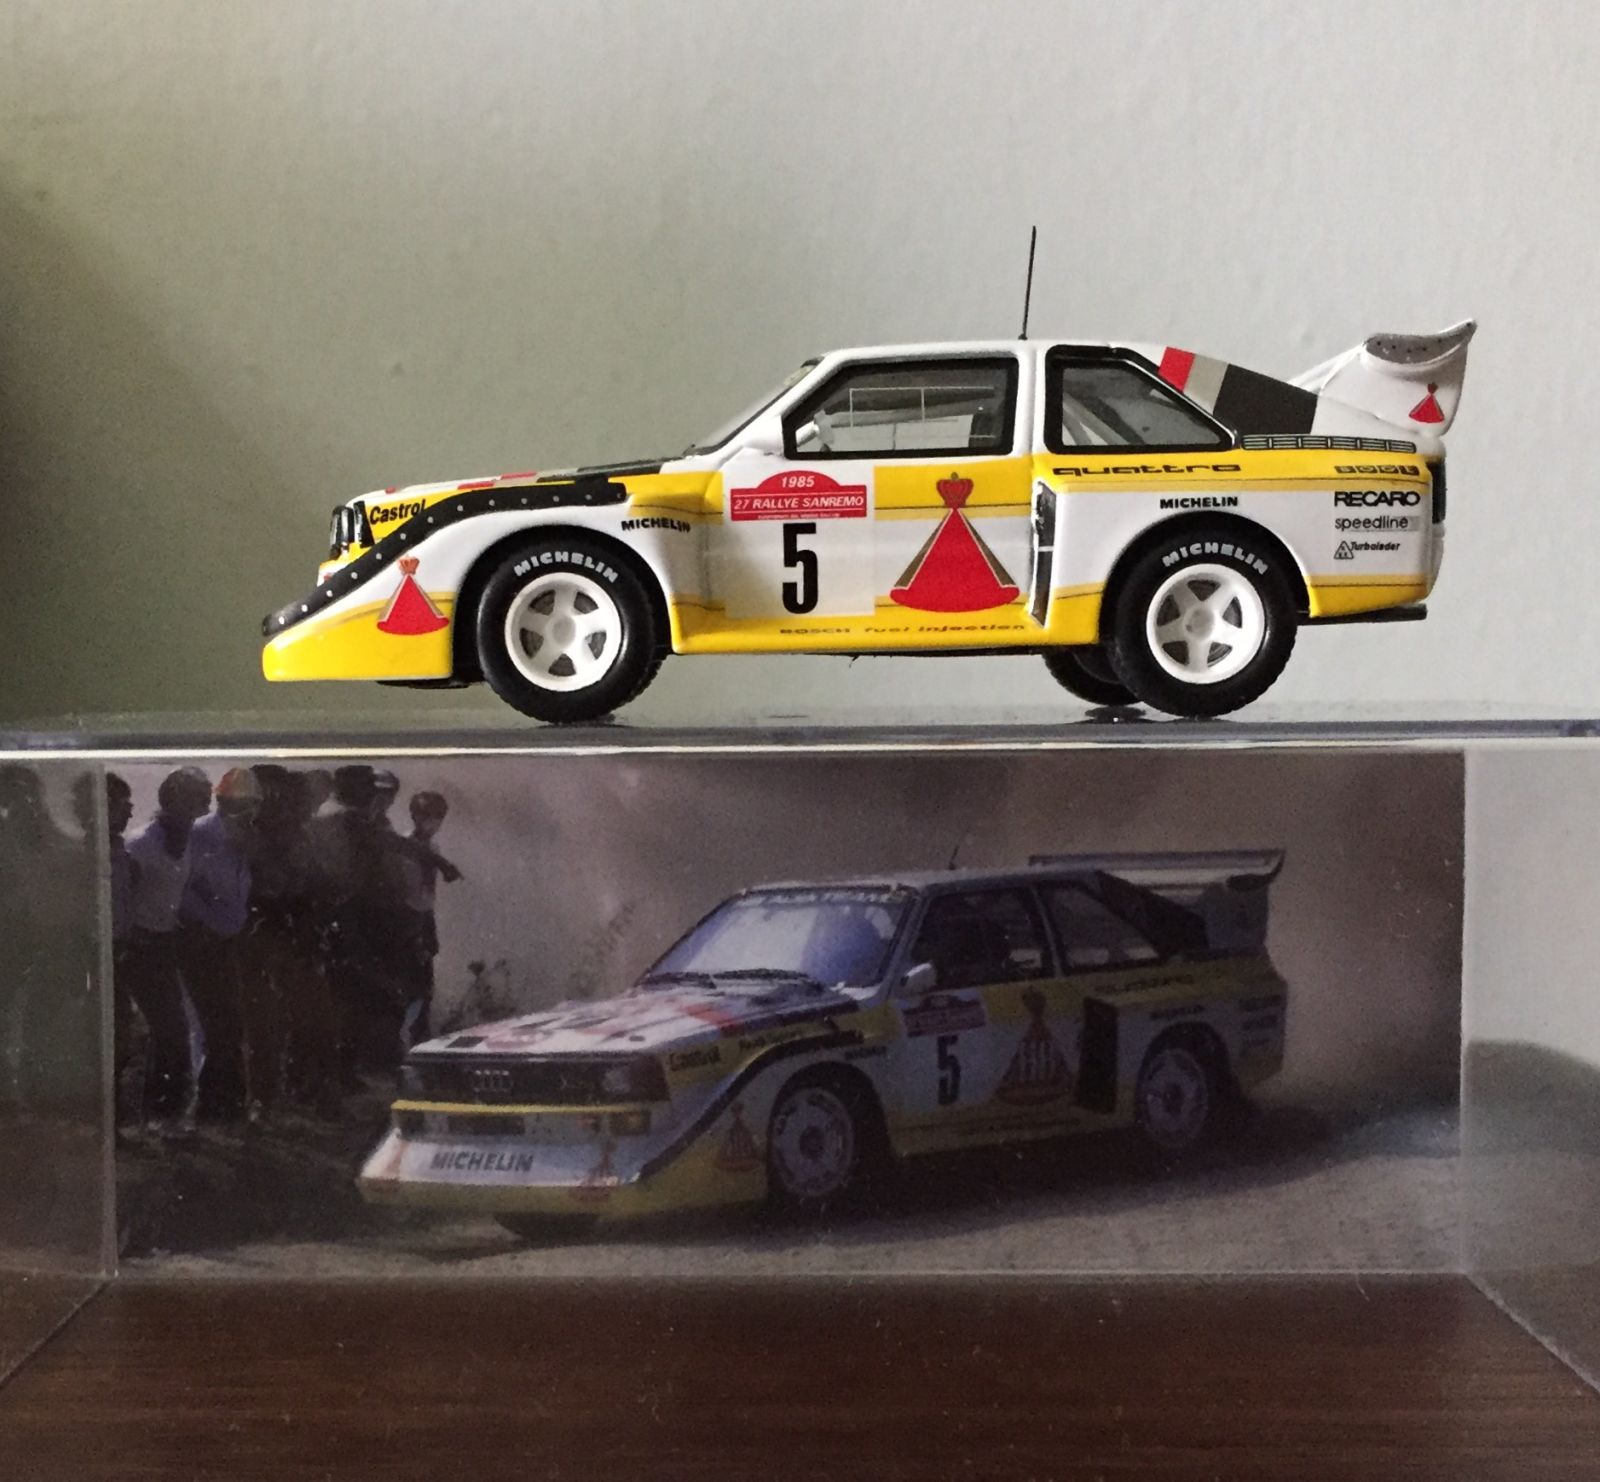 Model display case comes with a photo of the real car. Behind the card is the specs of the rally vehicle. So cool!